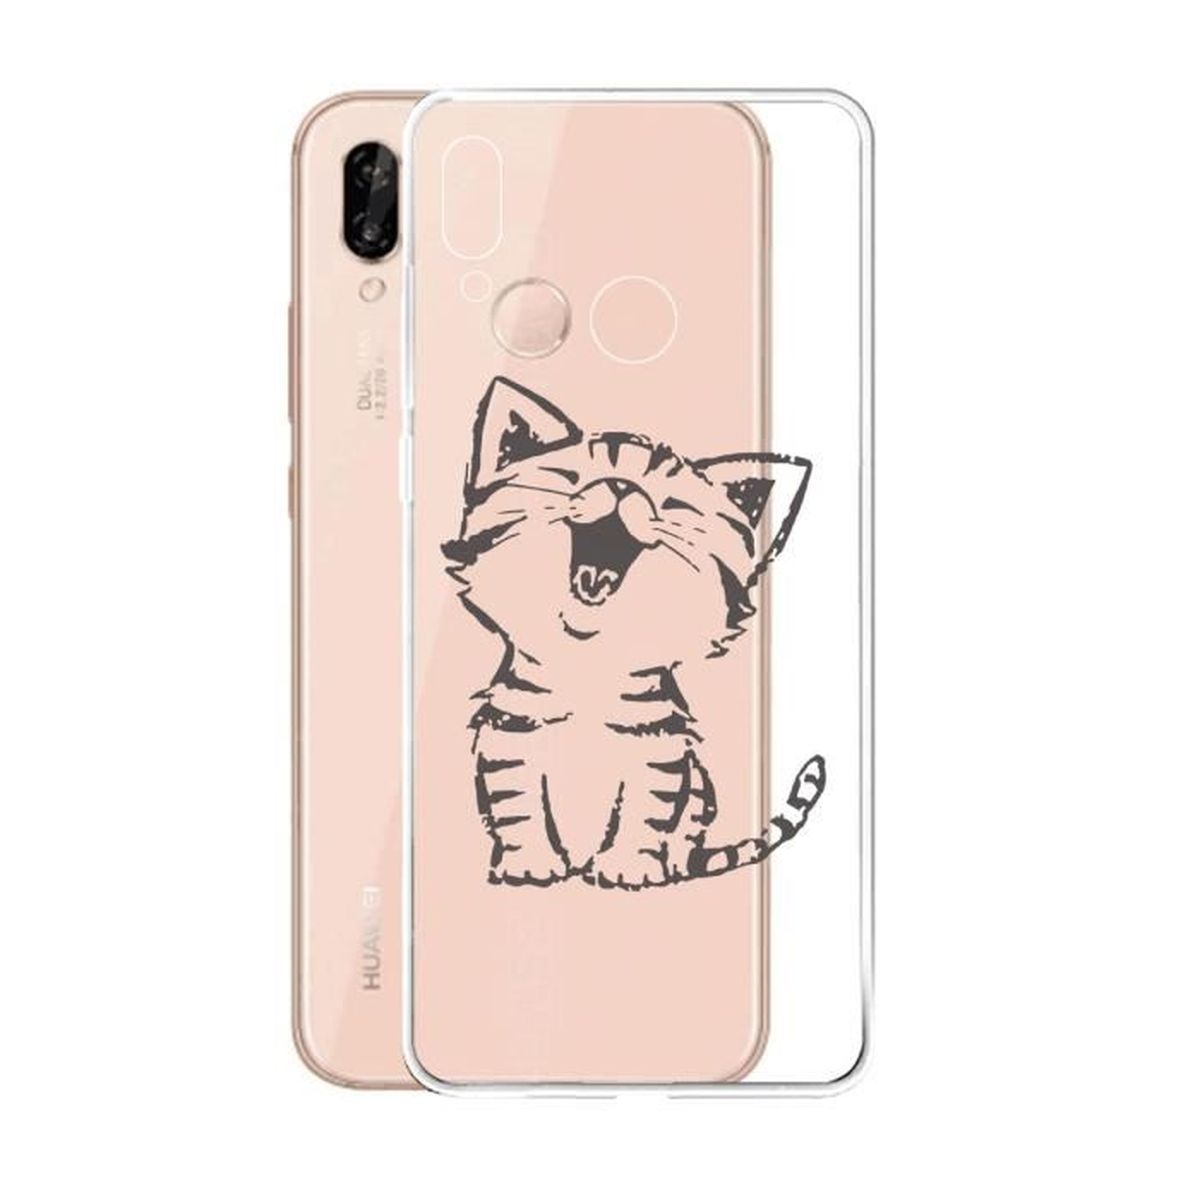 huawei p30 lite coque silicone chat